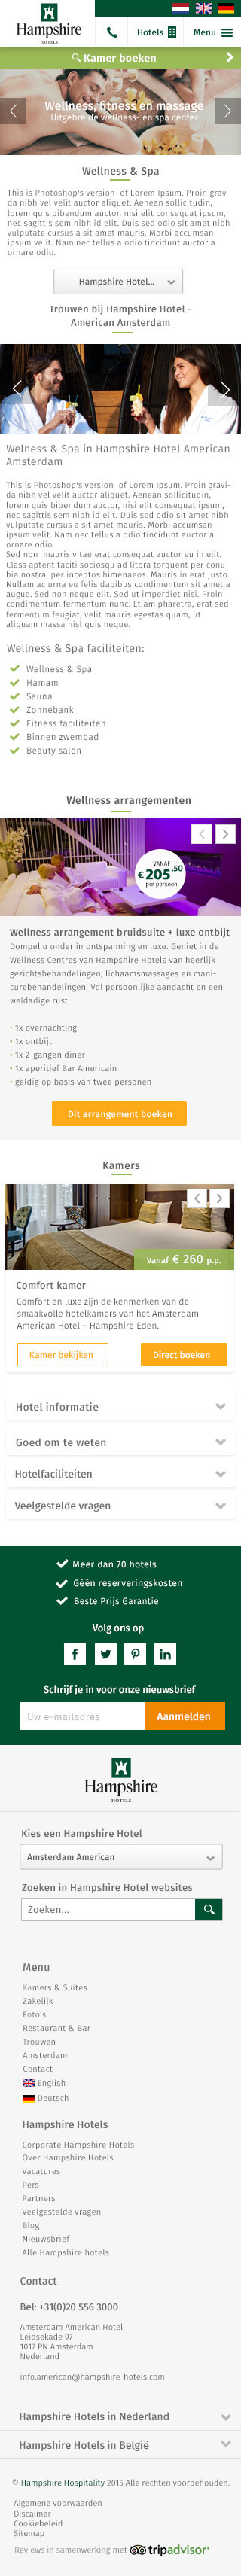 hotel Booking Travel